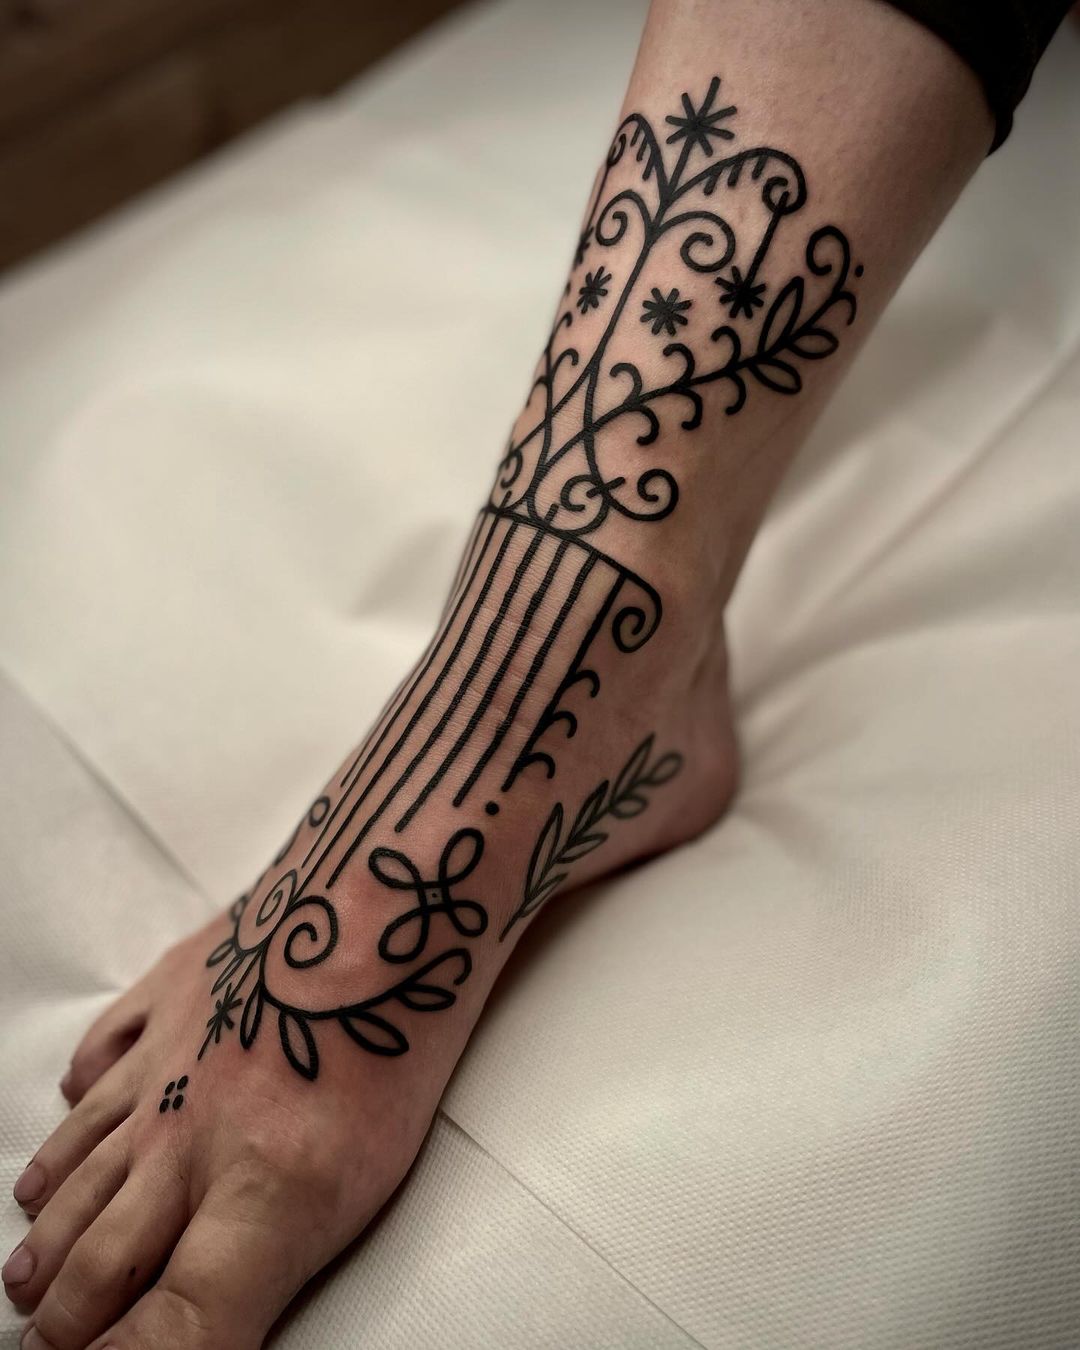 50+ Elegant Foot Tattoo Designs for Women - For Creative Juice | Foot  tattoos for women, Tattoo designs foot, Ankle tattoo designs